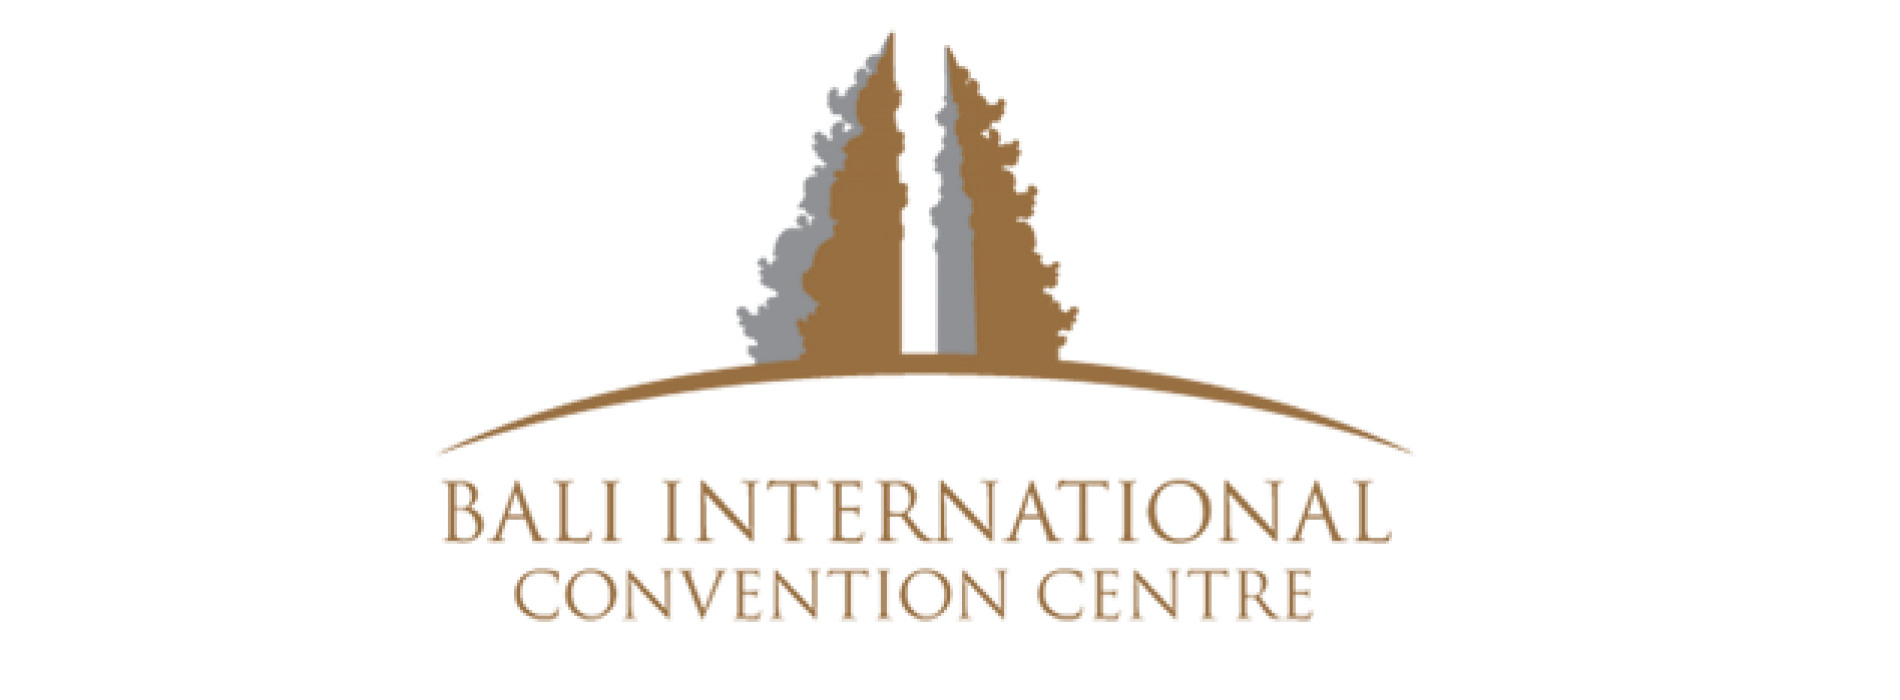 Bali International Convention Centre hosted 24th Coaltrans Asia 2018 Conference